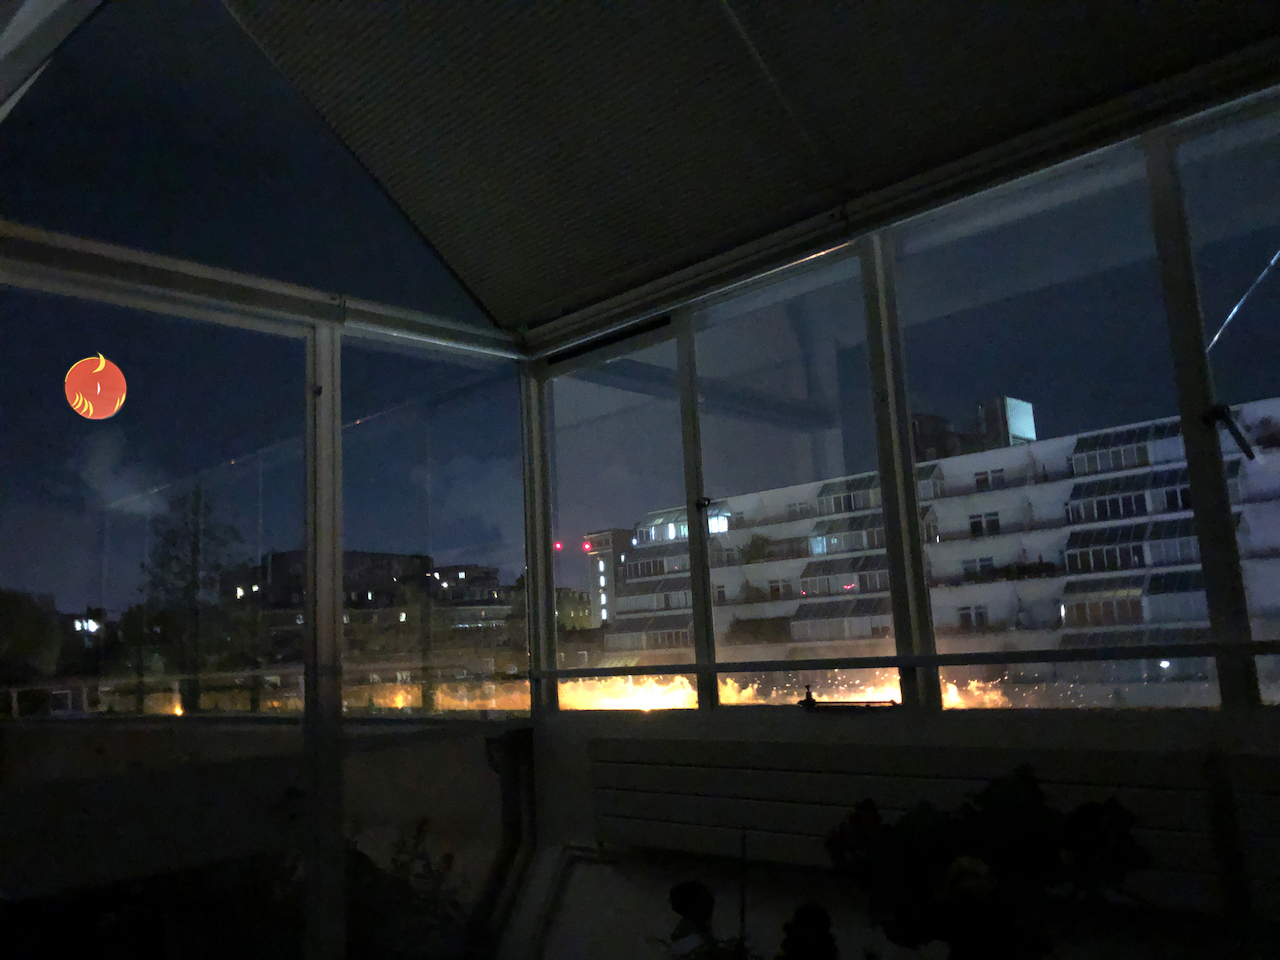 This is a night time view form inside my front room. You can get an idea of the extent of my windows. And see the flats opposite me. THeres an orange moon with crescent moonlets high up in the far left of the windows.